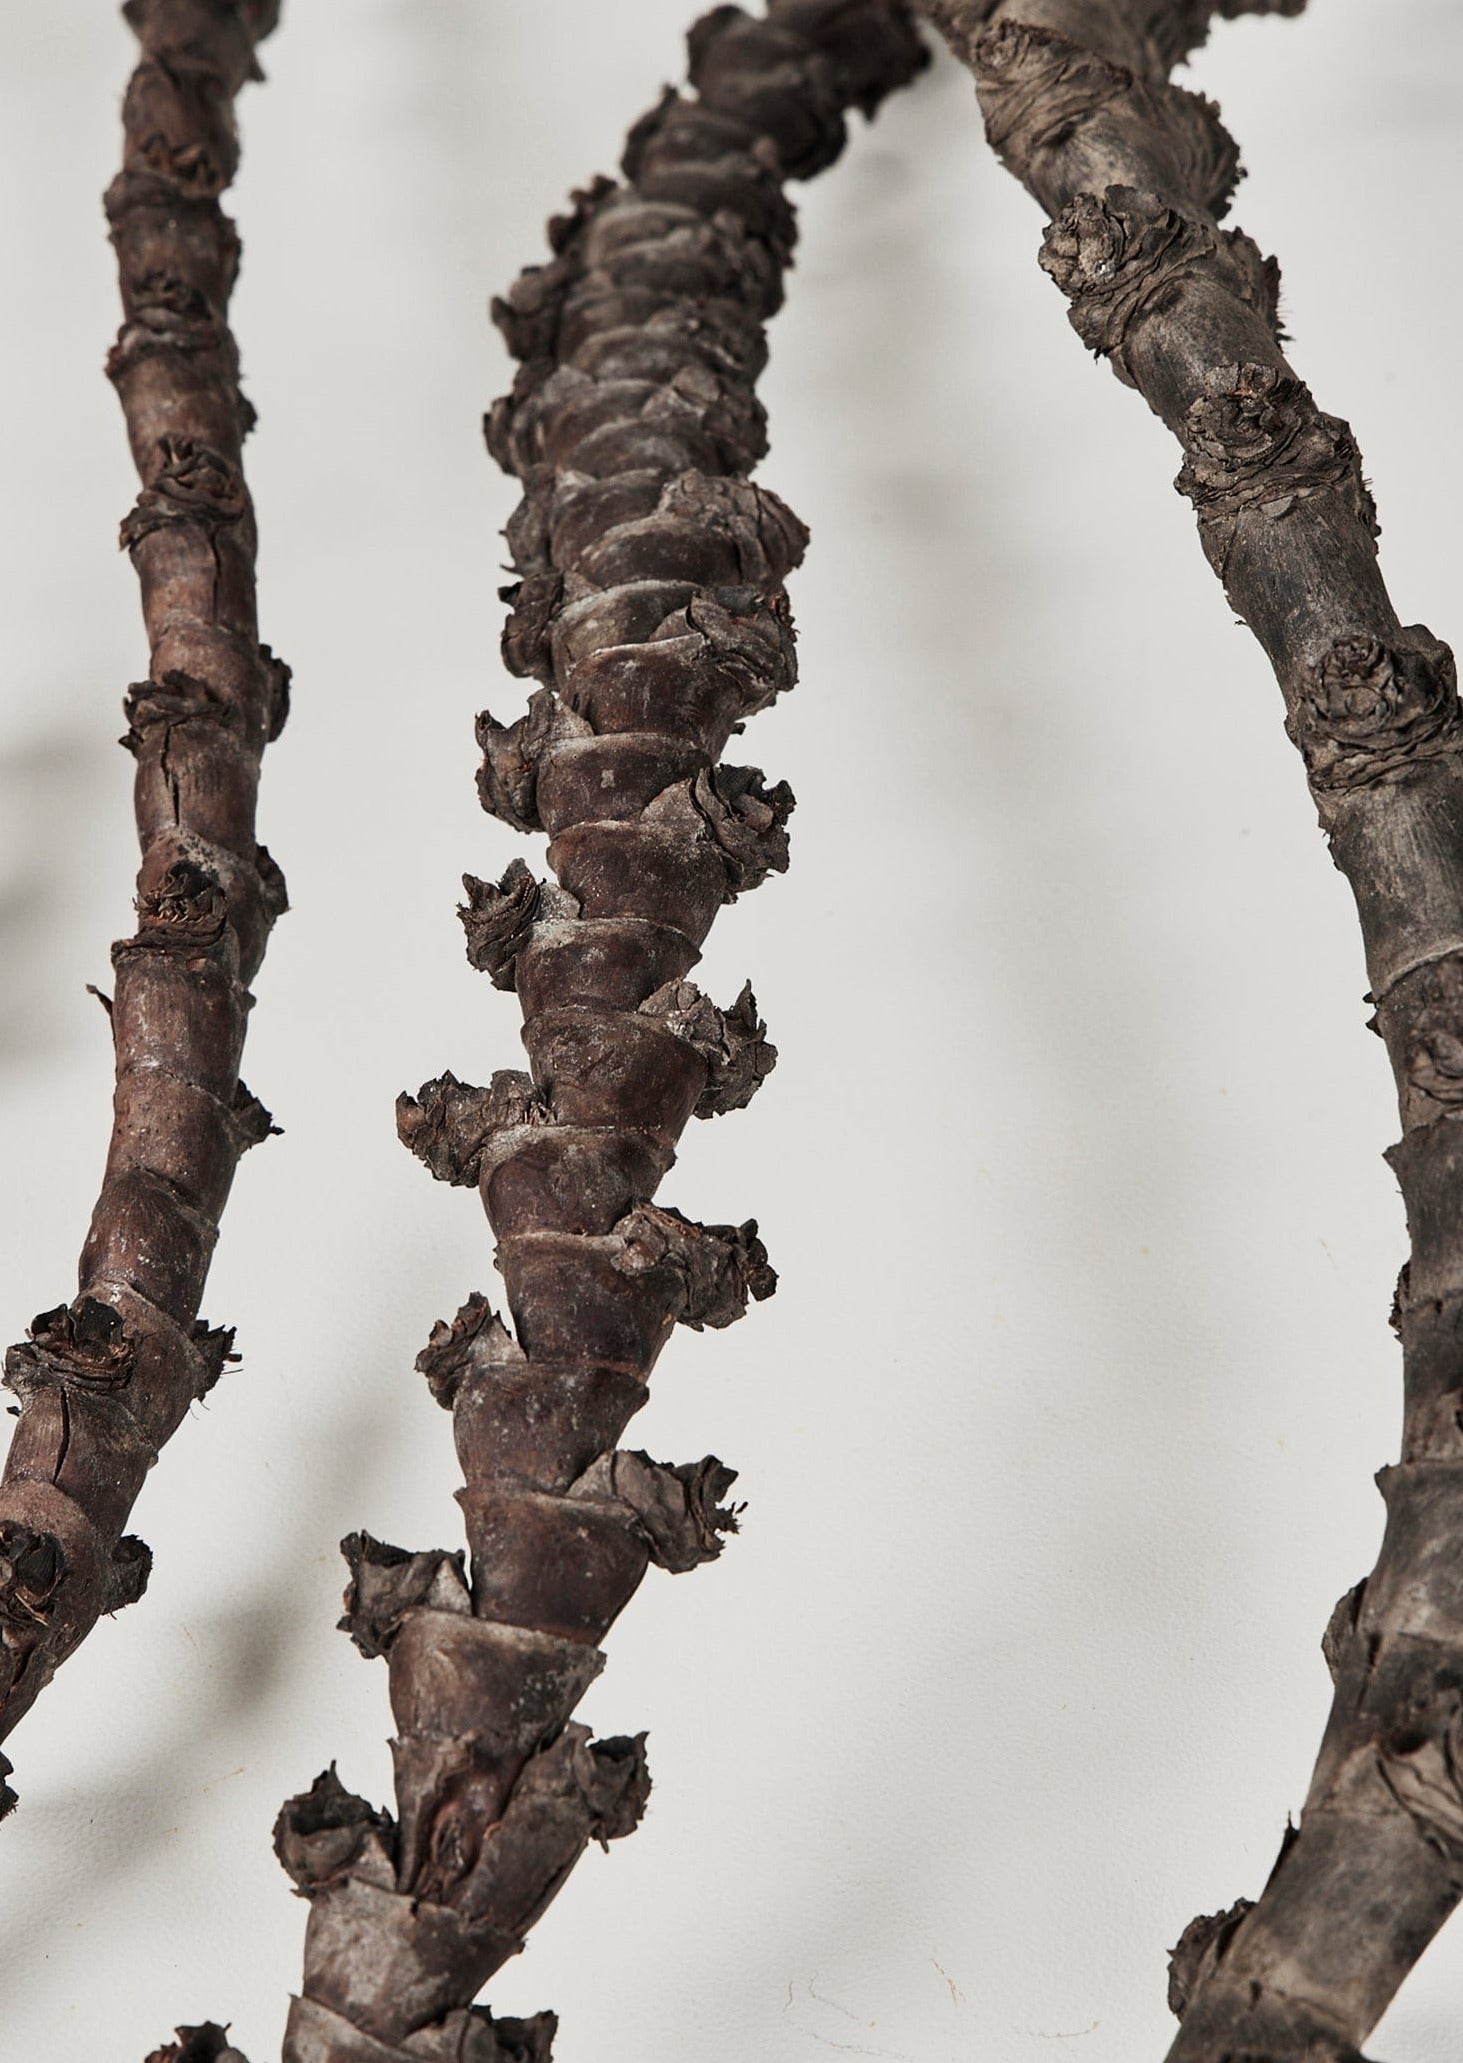 Natural Brown Dried Curled Ladder Branches in Closeup View